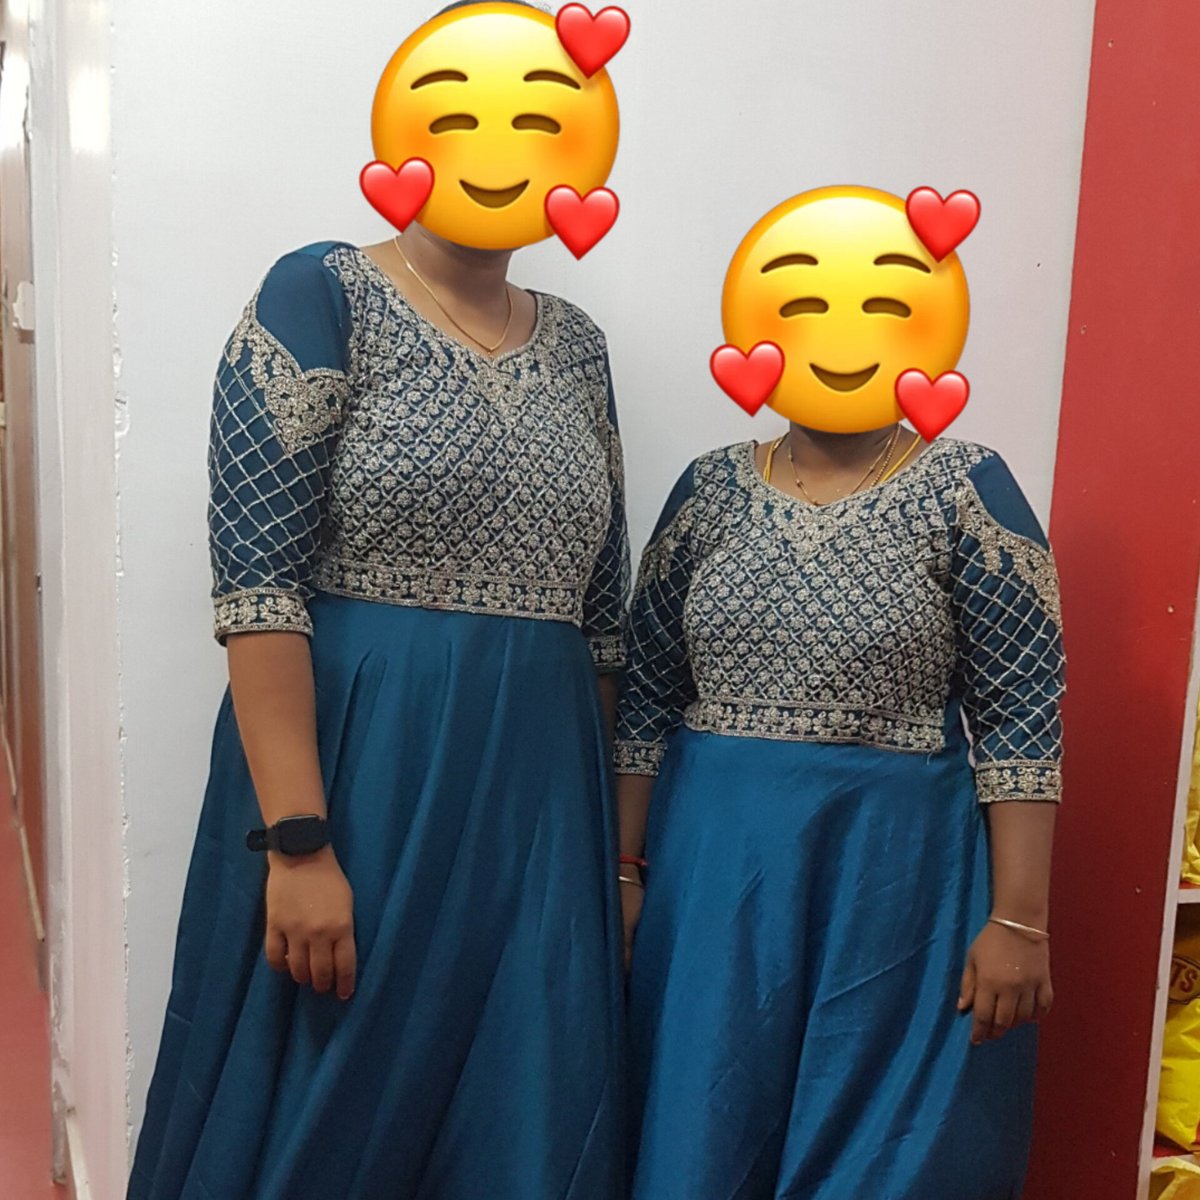 Customer Dress 🤩😎
OFFERS GOING on....
10% Discount for Fabrics 😎
25% Discount for Readymades 😎
📲74484 33333
📲74484 33333
📍Cantonment, Trichy.

#momanddaughter #familyoutfits #familytime #love #familygoals #bhfyp #trending #reels #viral #shorts #kurties